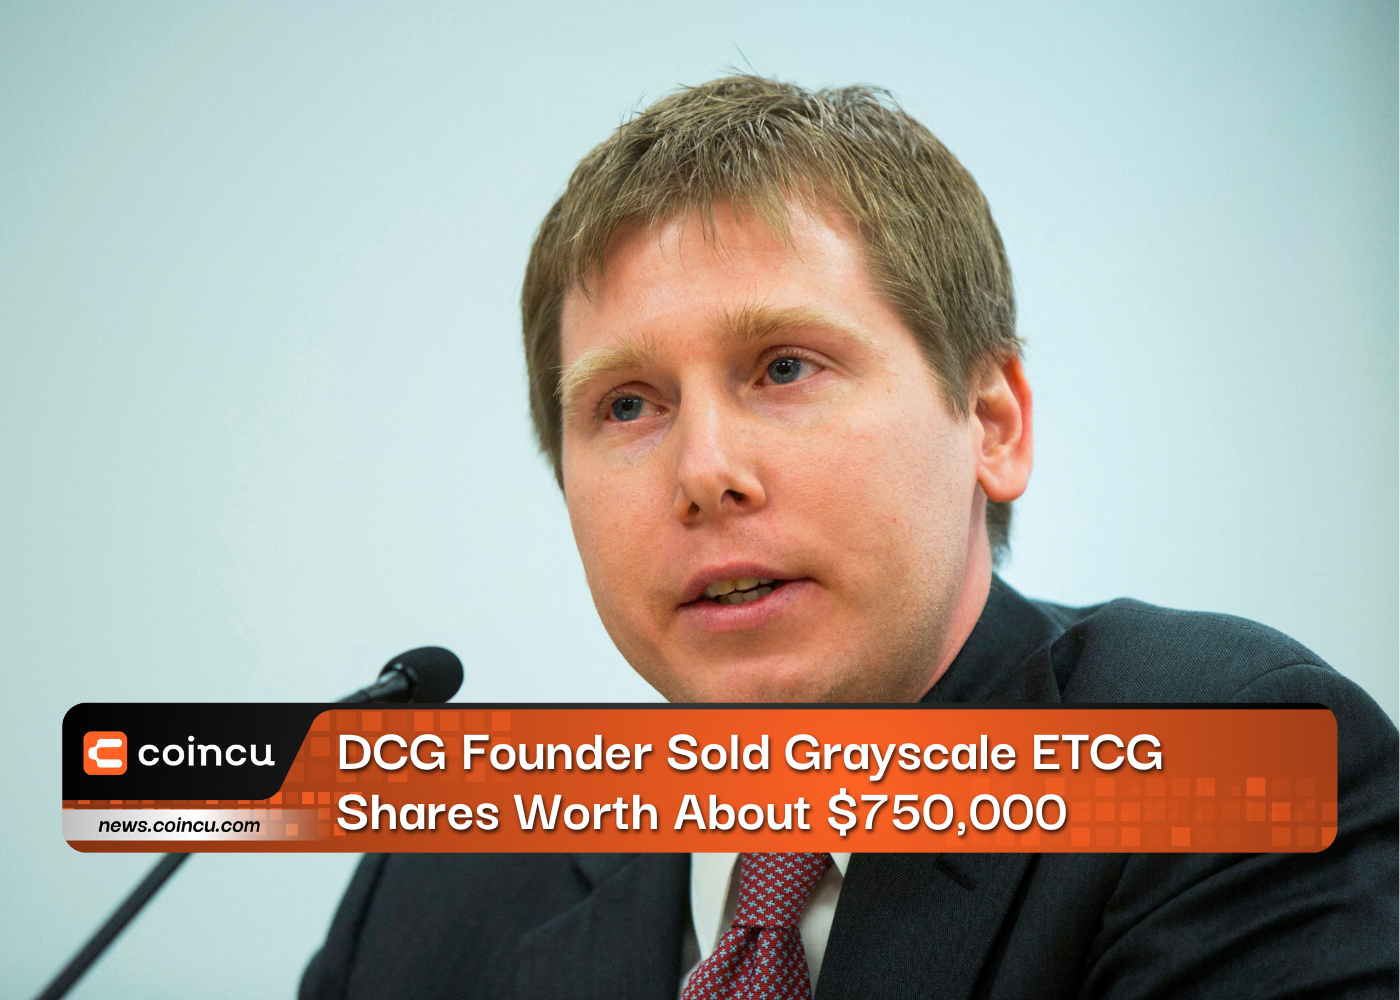 DCG Founder Sold Grayscale ETCG Shares Worth About $750,000